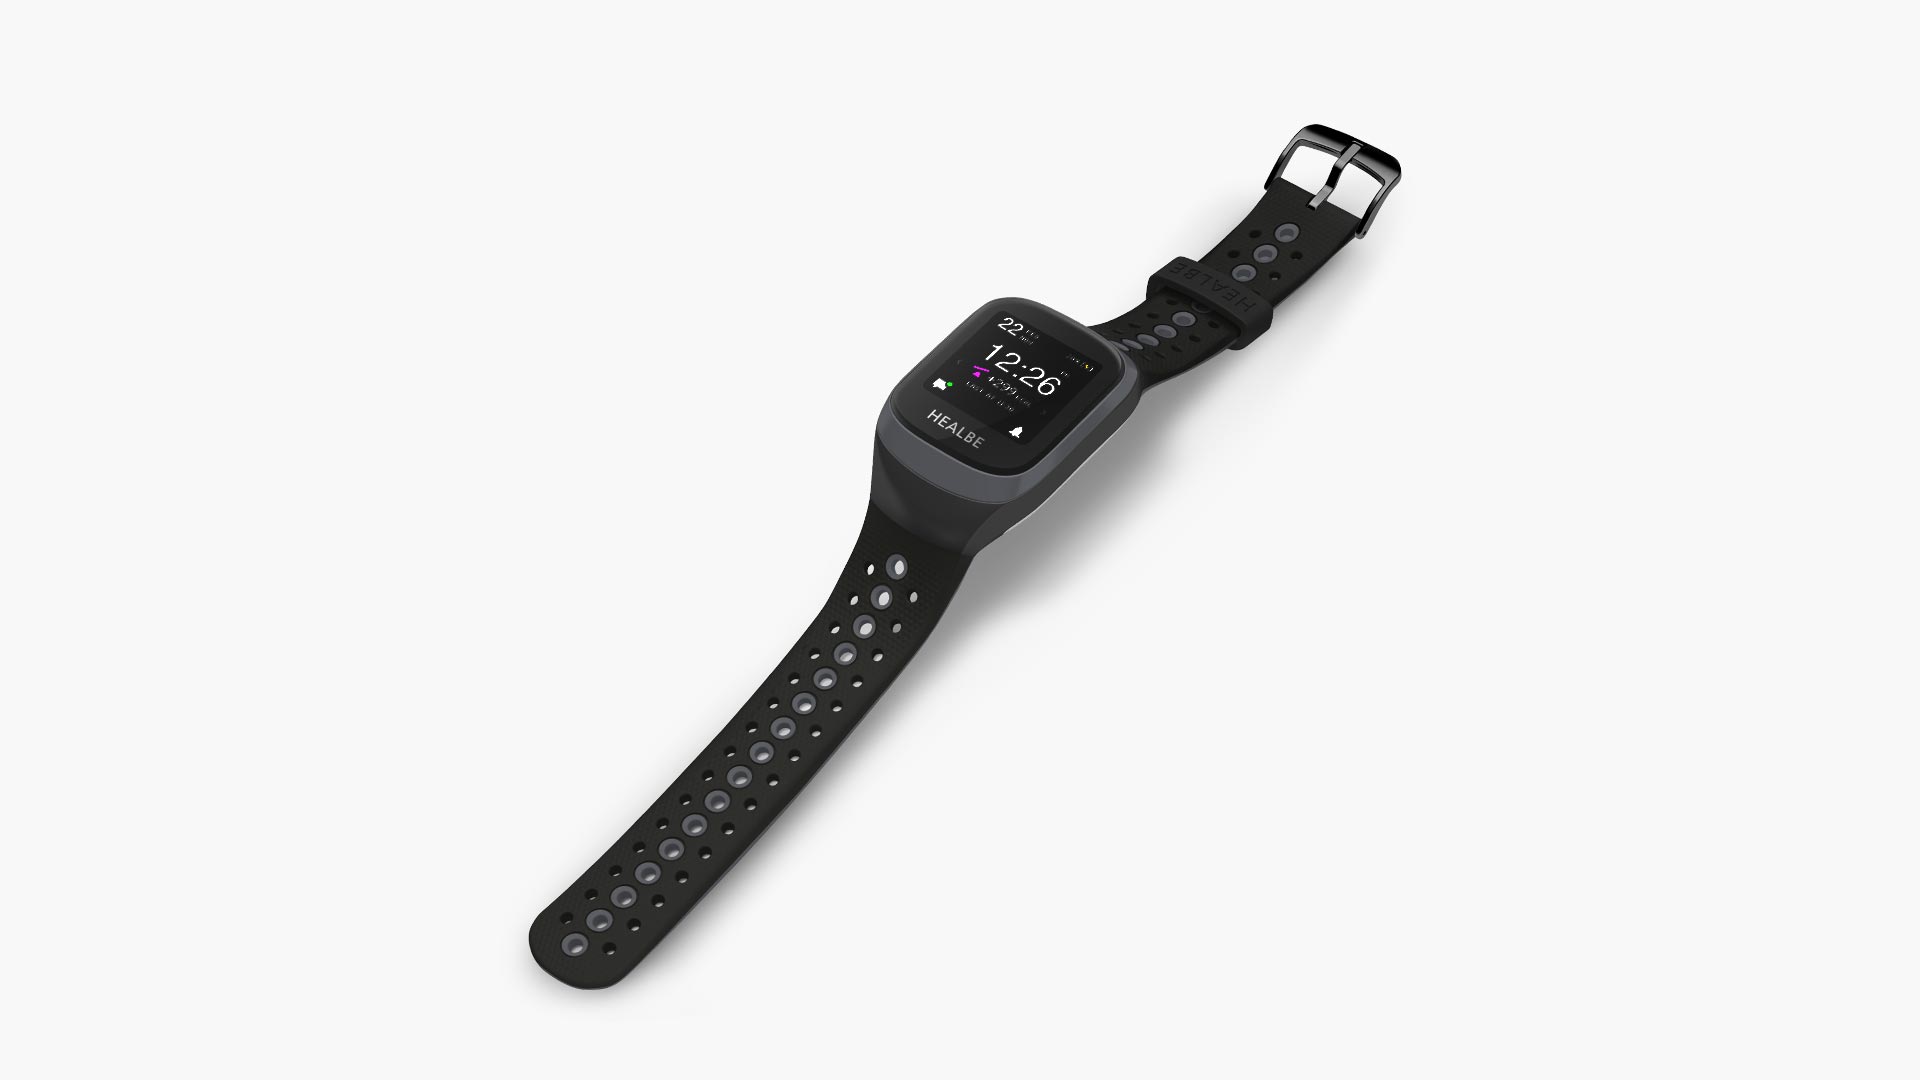 Healbe GoBe3 Smart Fitness Watch - The nutrition-control health band.